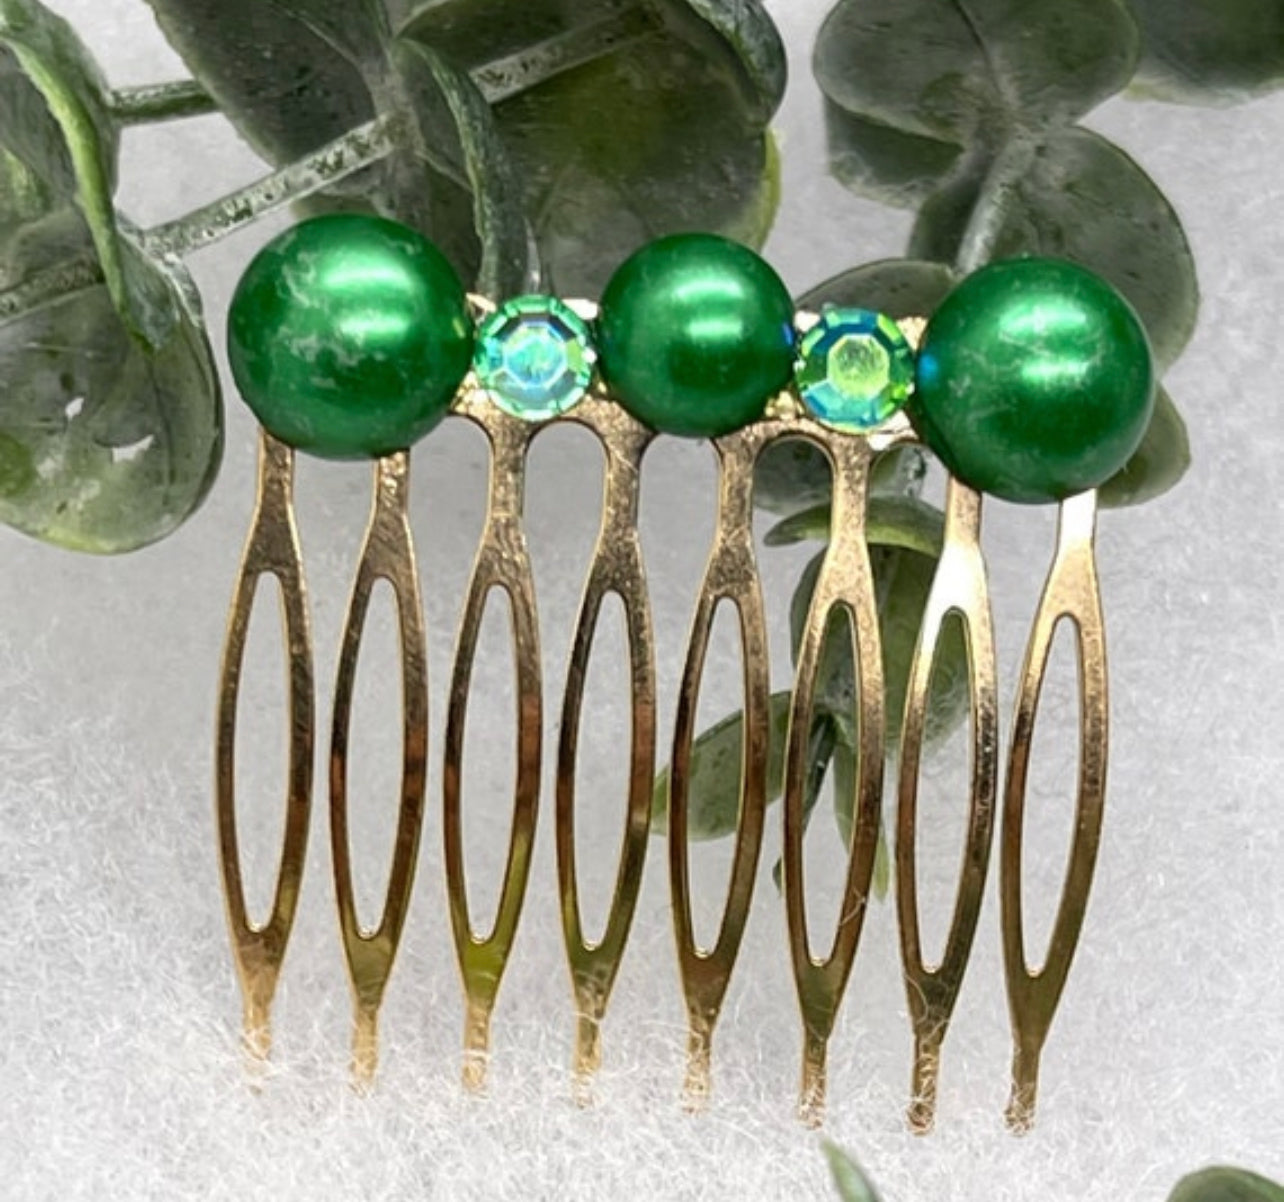 Emerald Green faux Pearl crystal side comb approximately 2.0”long gold metal hair accessory bridal wedding Retro